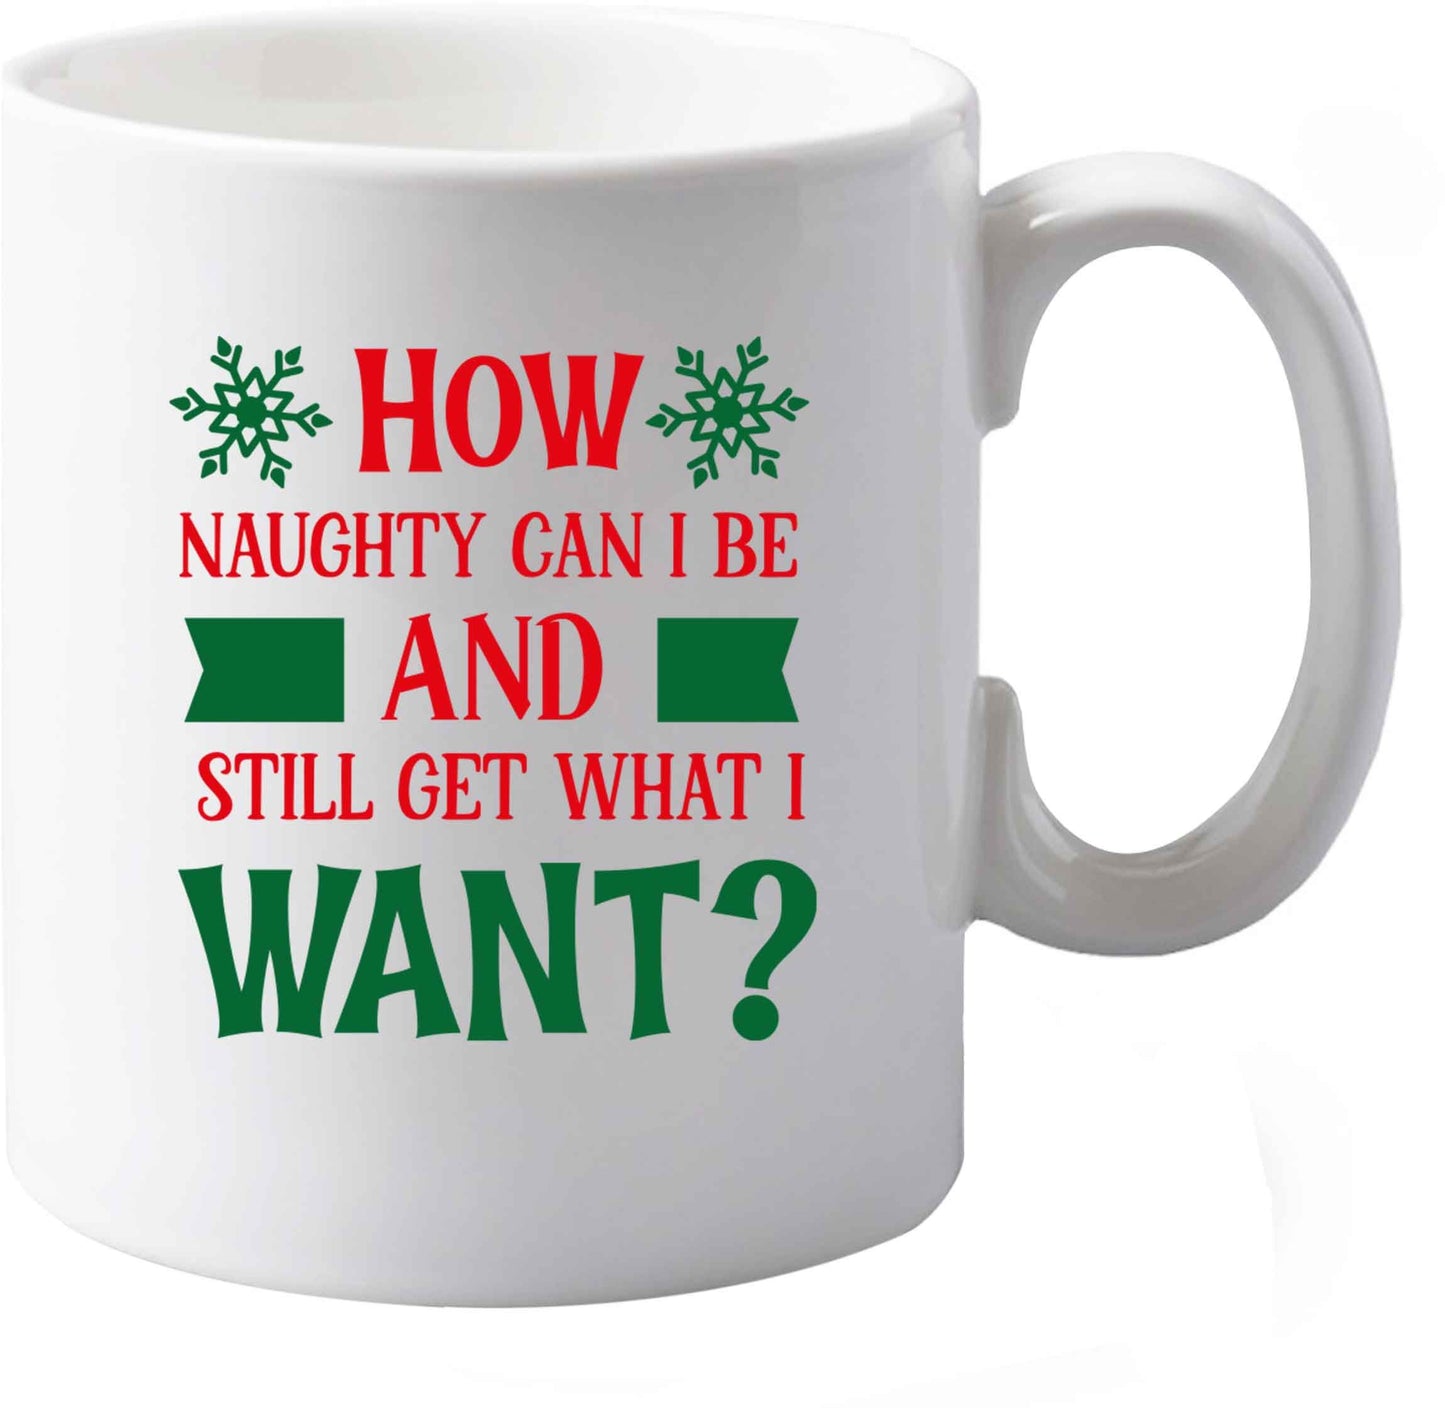 10 oz How naughty can I be and still get what I want? ceramic mug both sides